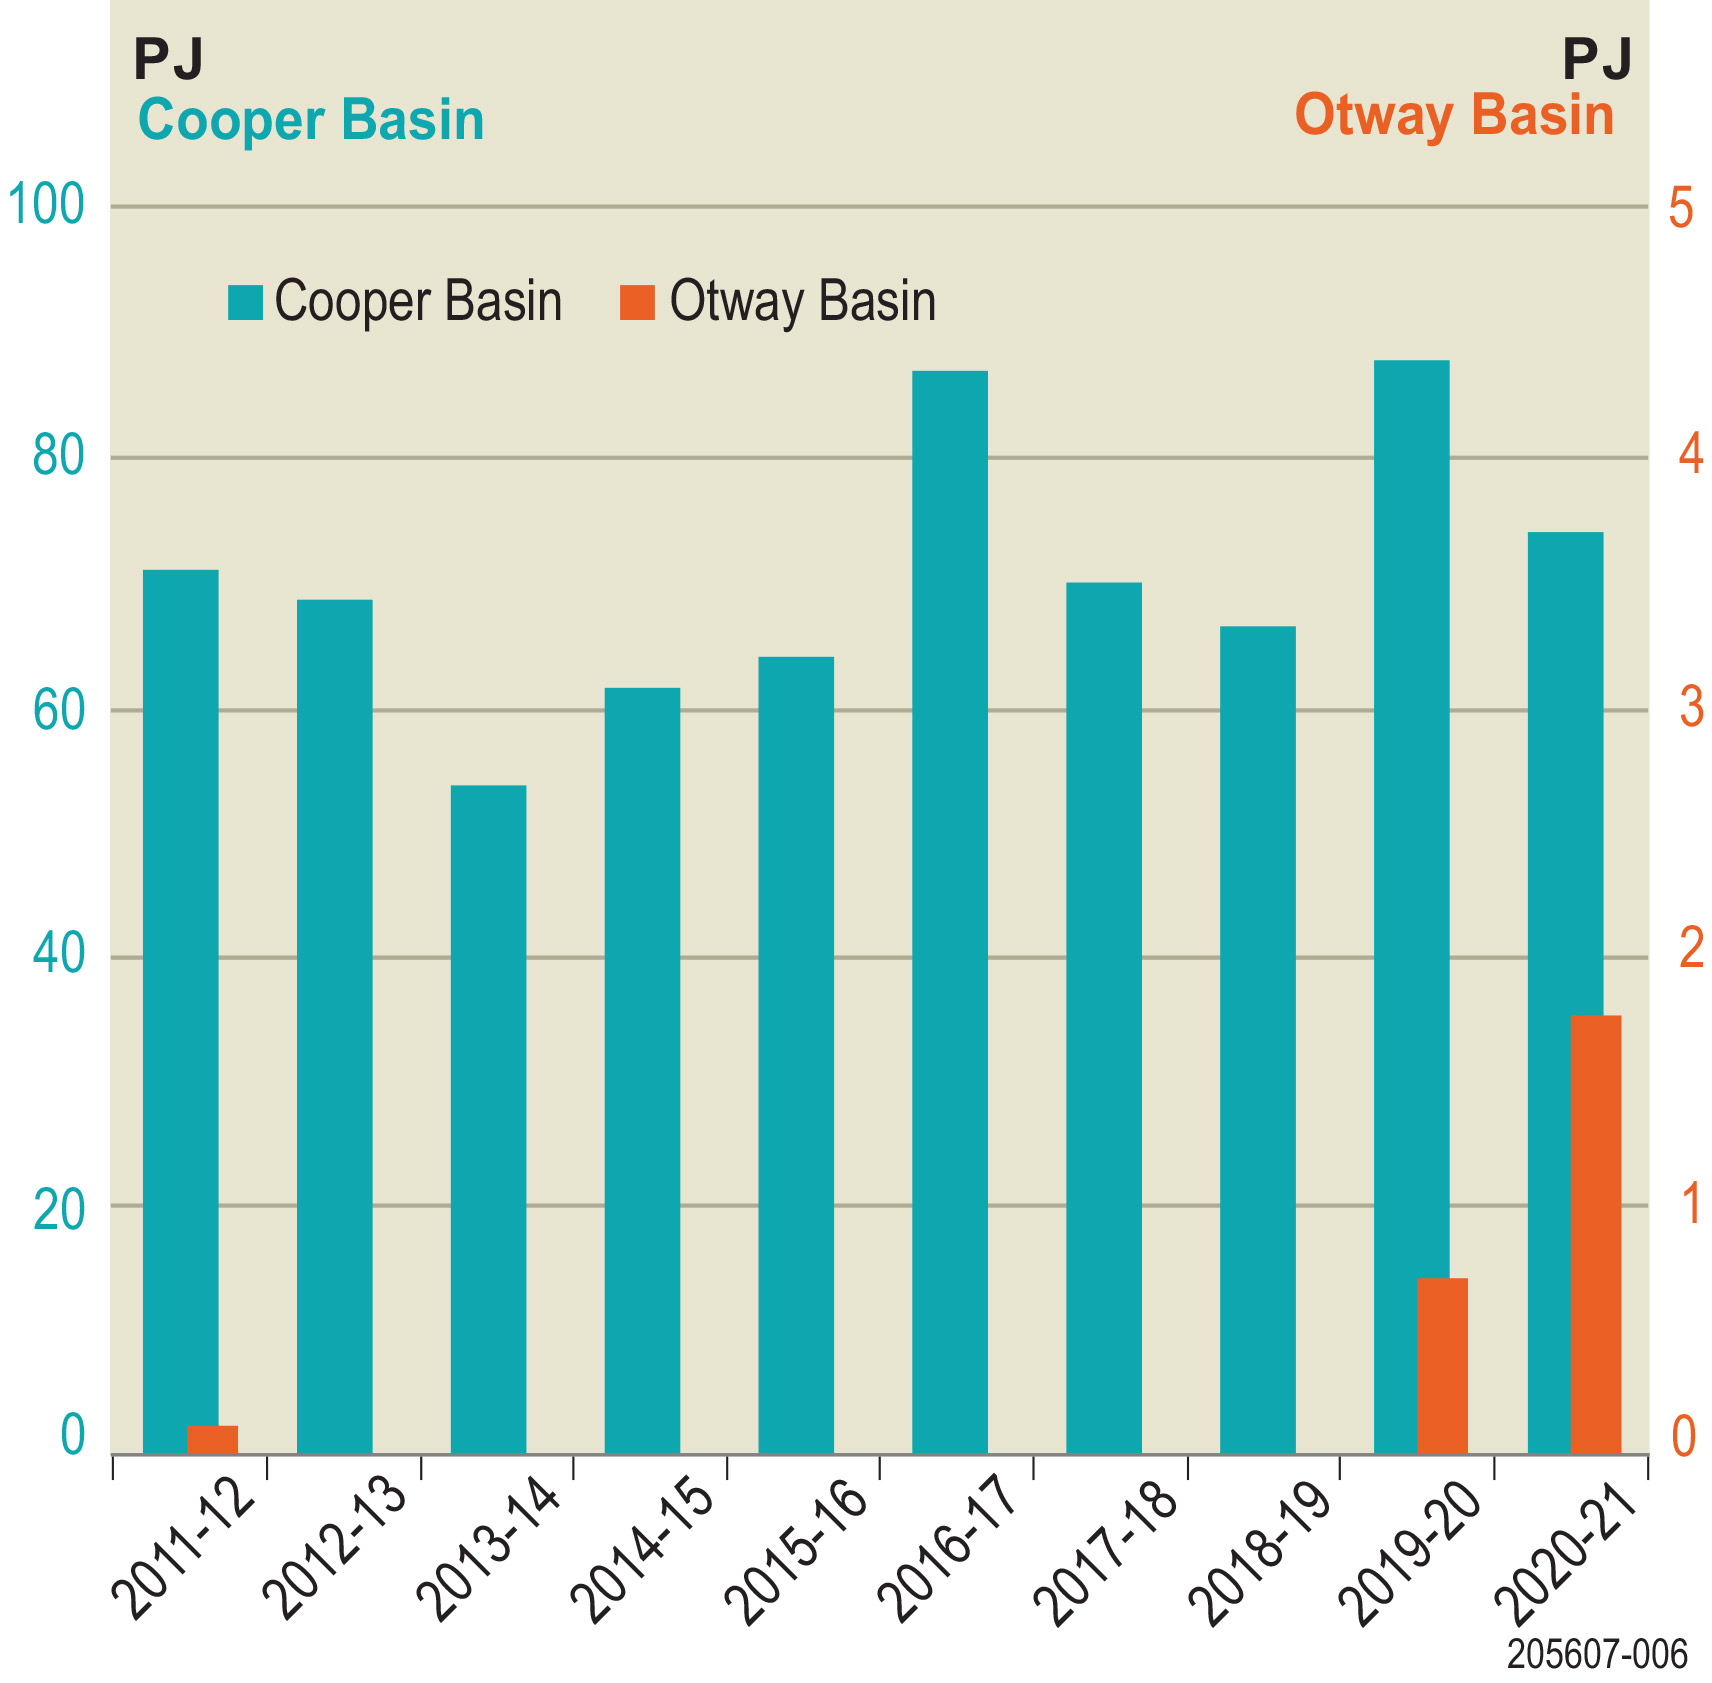 Graph showing gas sales (PJ) from the Cooper Basin and Otway Basin between 2011-12 and 2020-21 financial years.